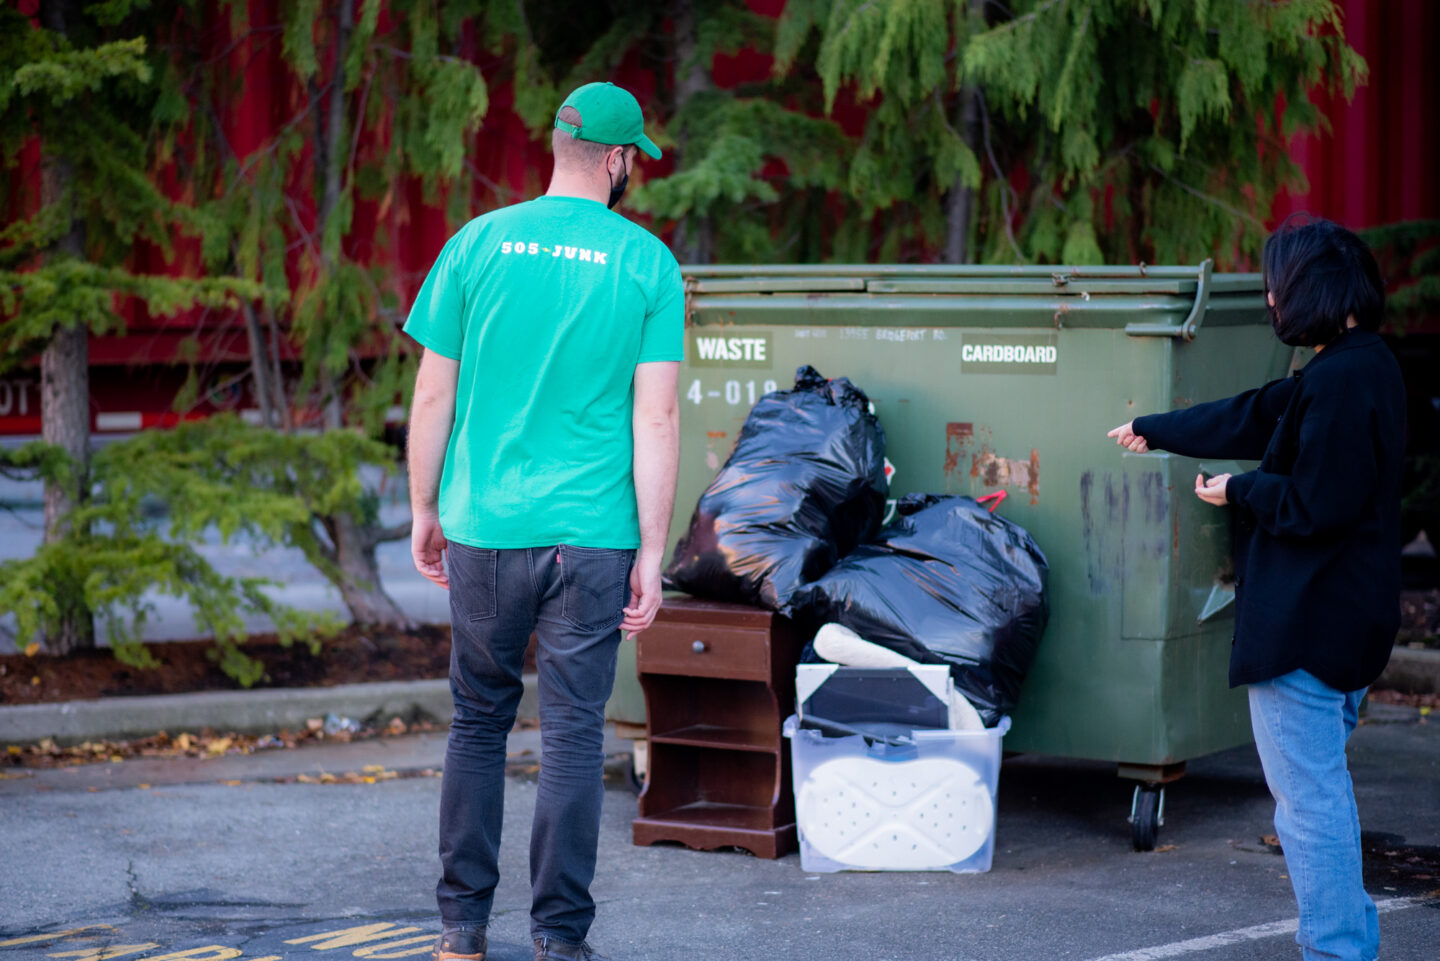 A 505-Junk employee completing junk removal for a property manager after somone dumped material by their dumpster.